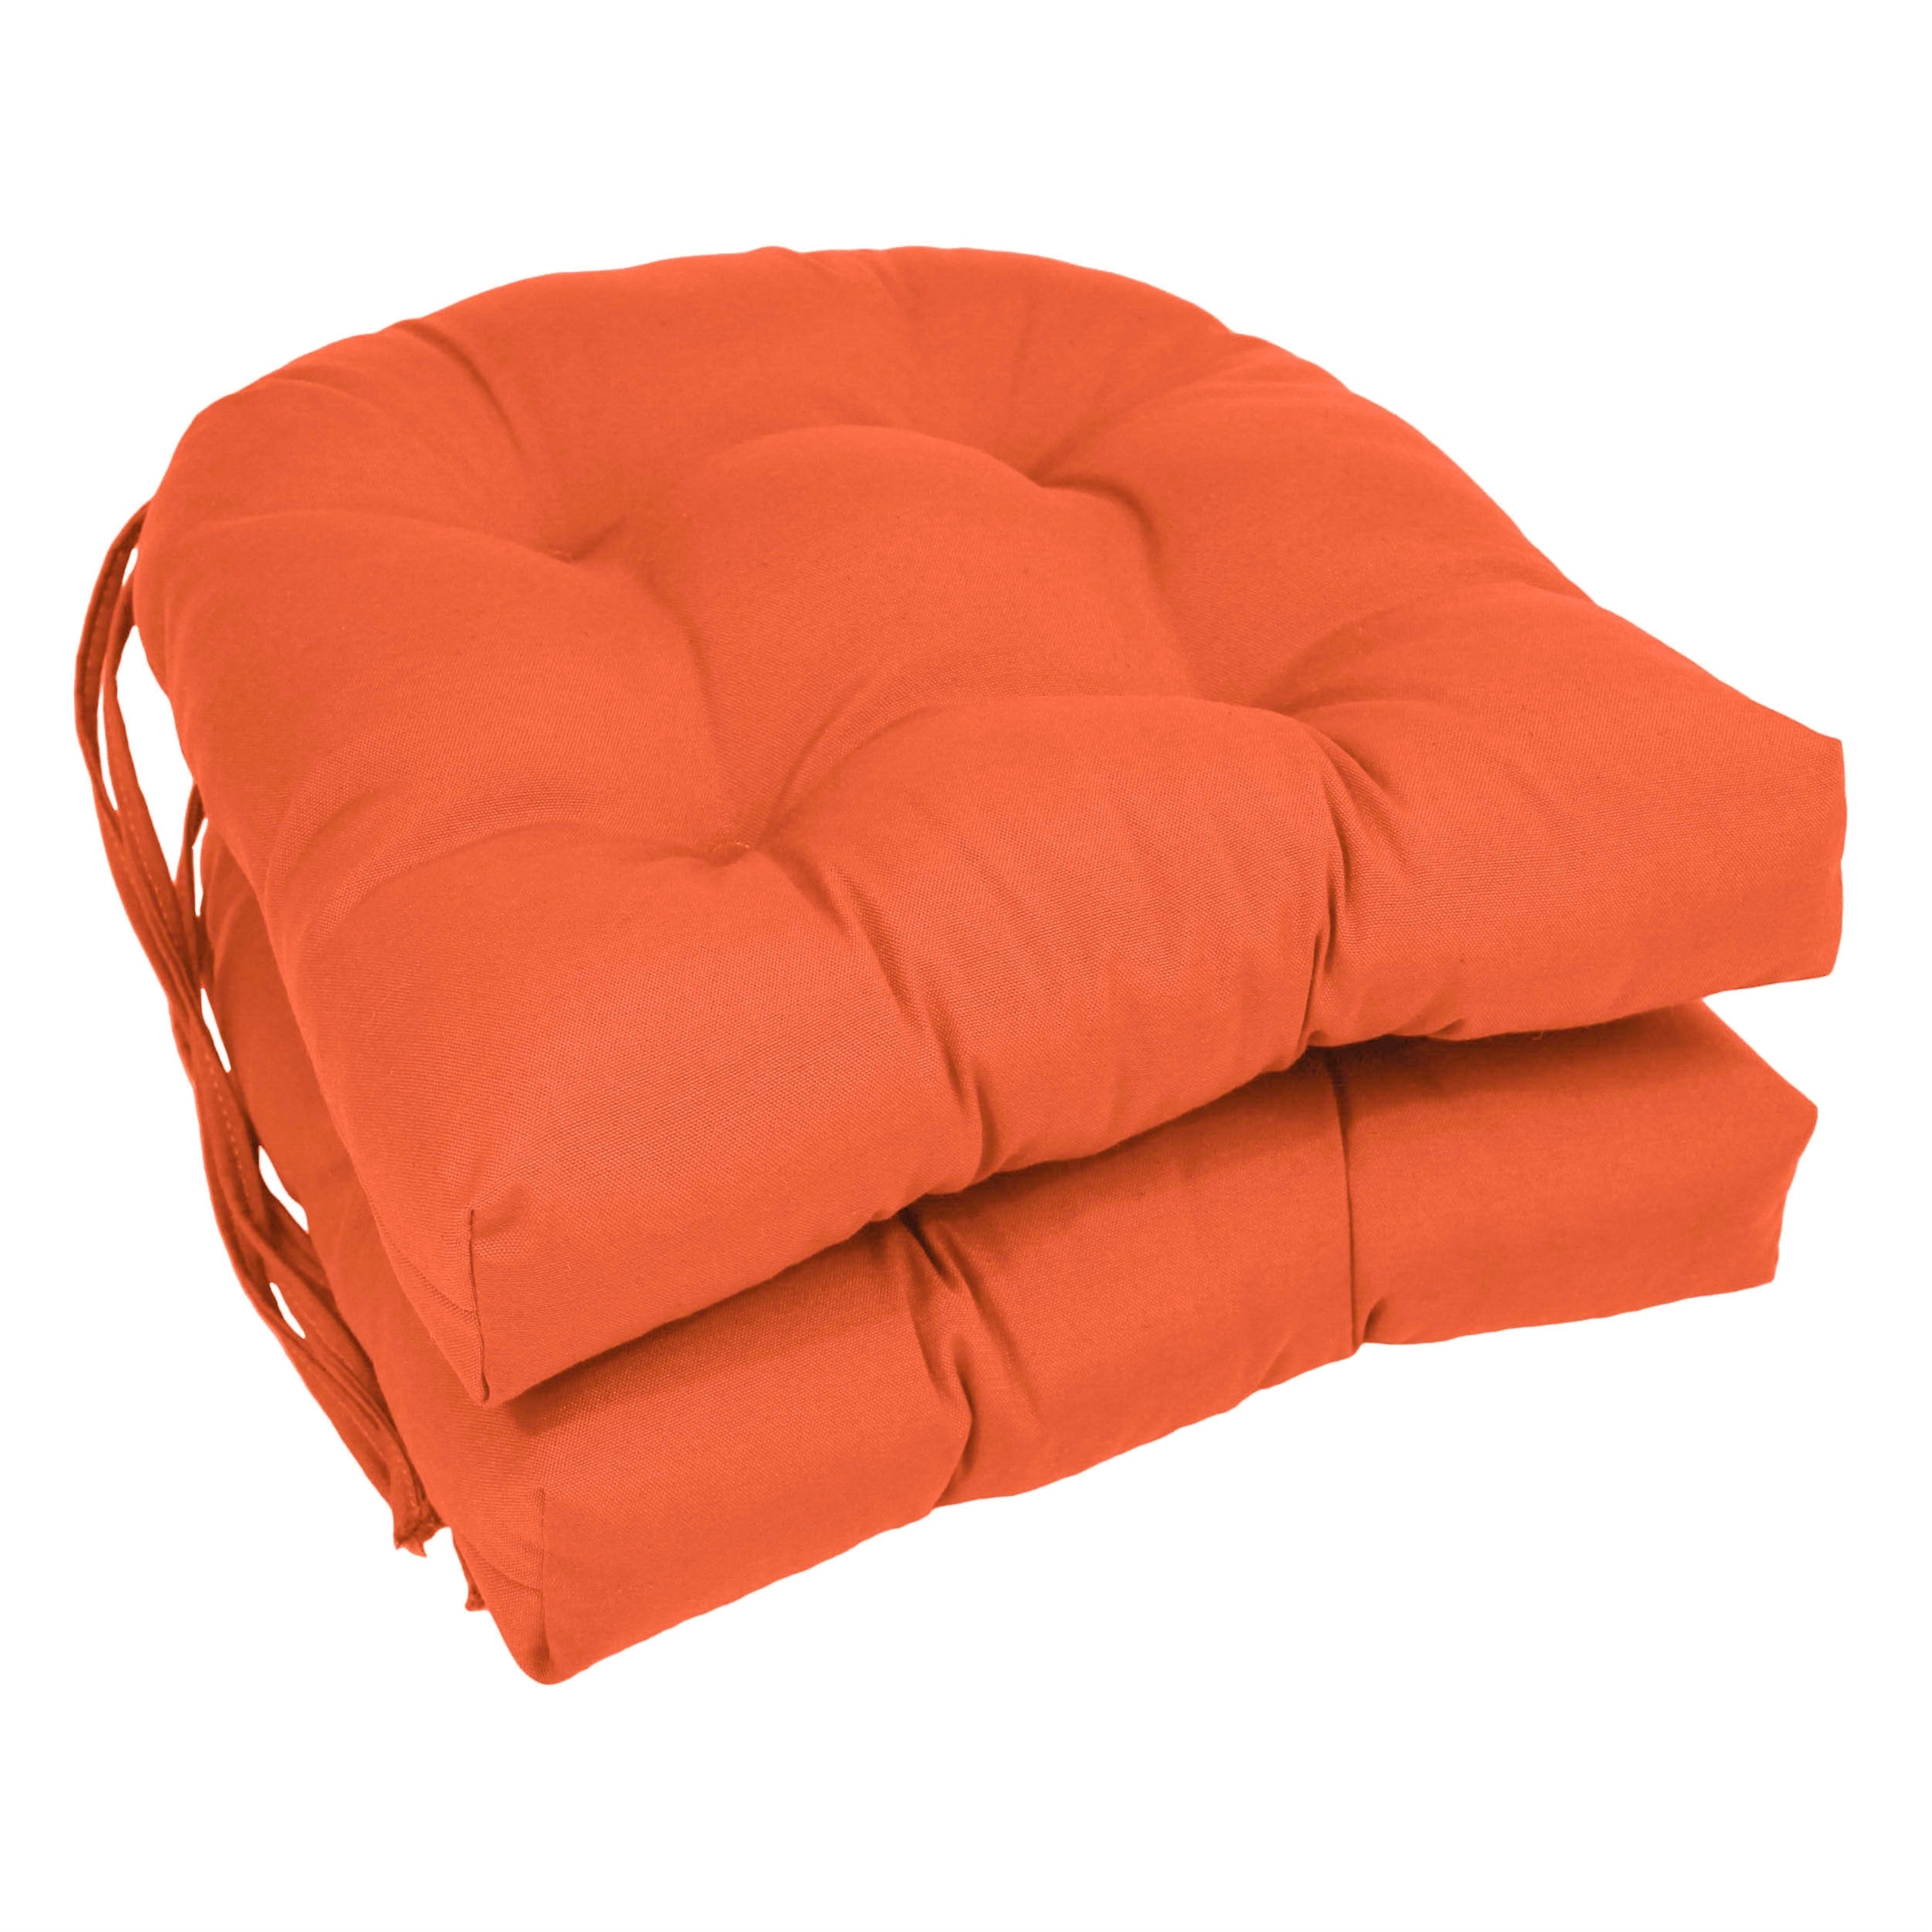 https://ak1.ostkcdn.com/images/products/is/images/direct/9e51b893ae85d9c4440b76717480b1532c44cf08/16-inch-U-Shaped-Indoor-Chair-Cushions-%28Set-of-2%2C-4%2C-or-6%29.jpg